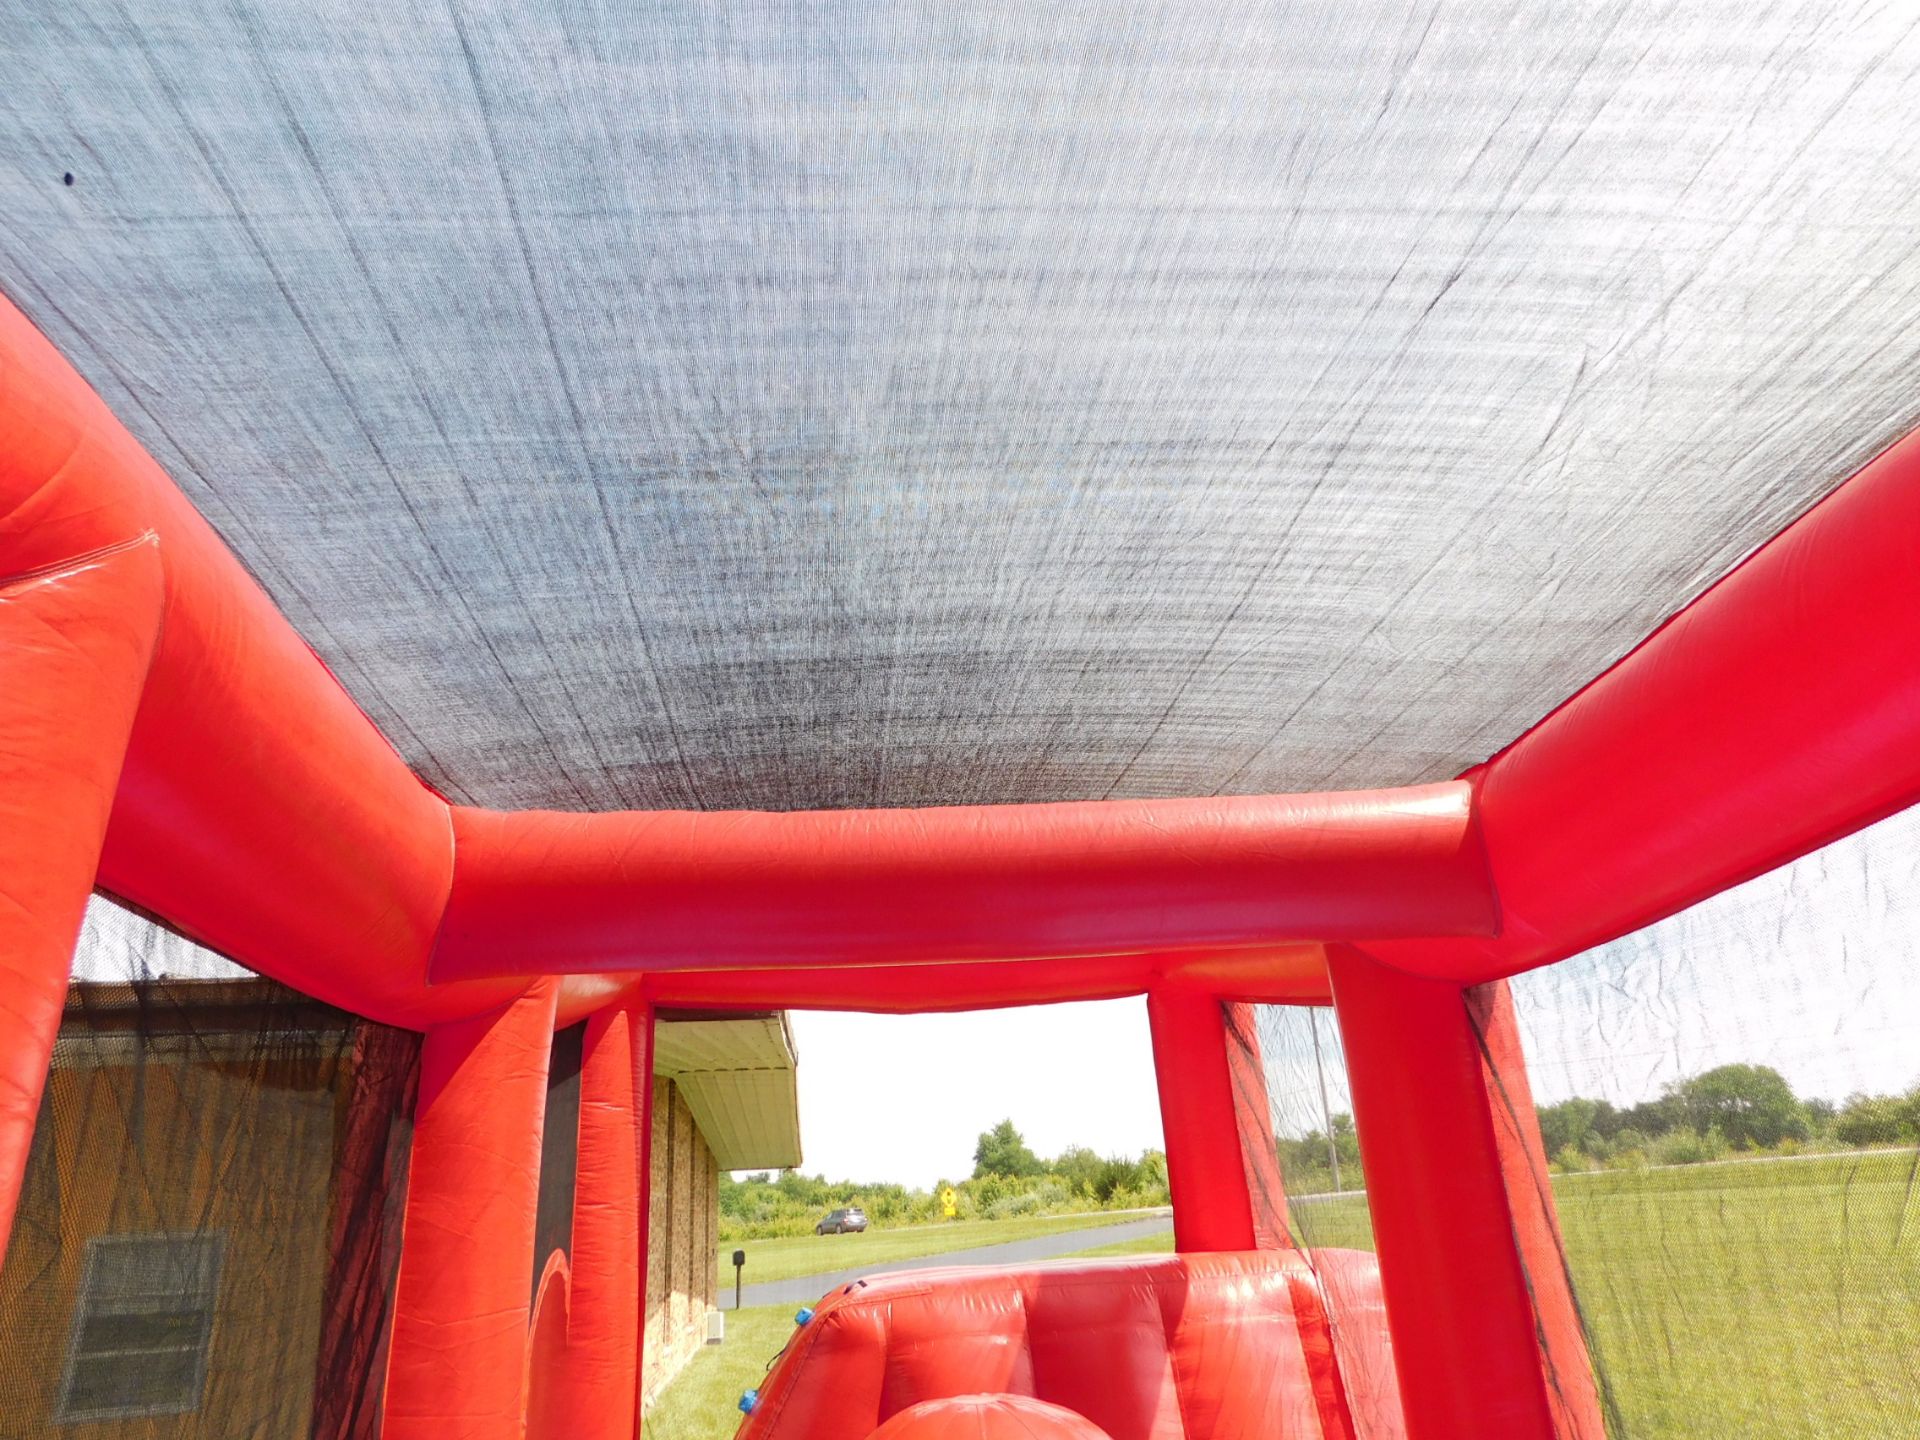 E-Z Inflatables Wiped Out Obstacle Course, 18'WX42'LX13'H #88 - Image 13 of 22